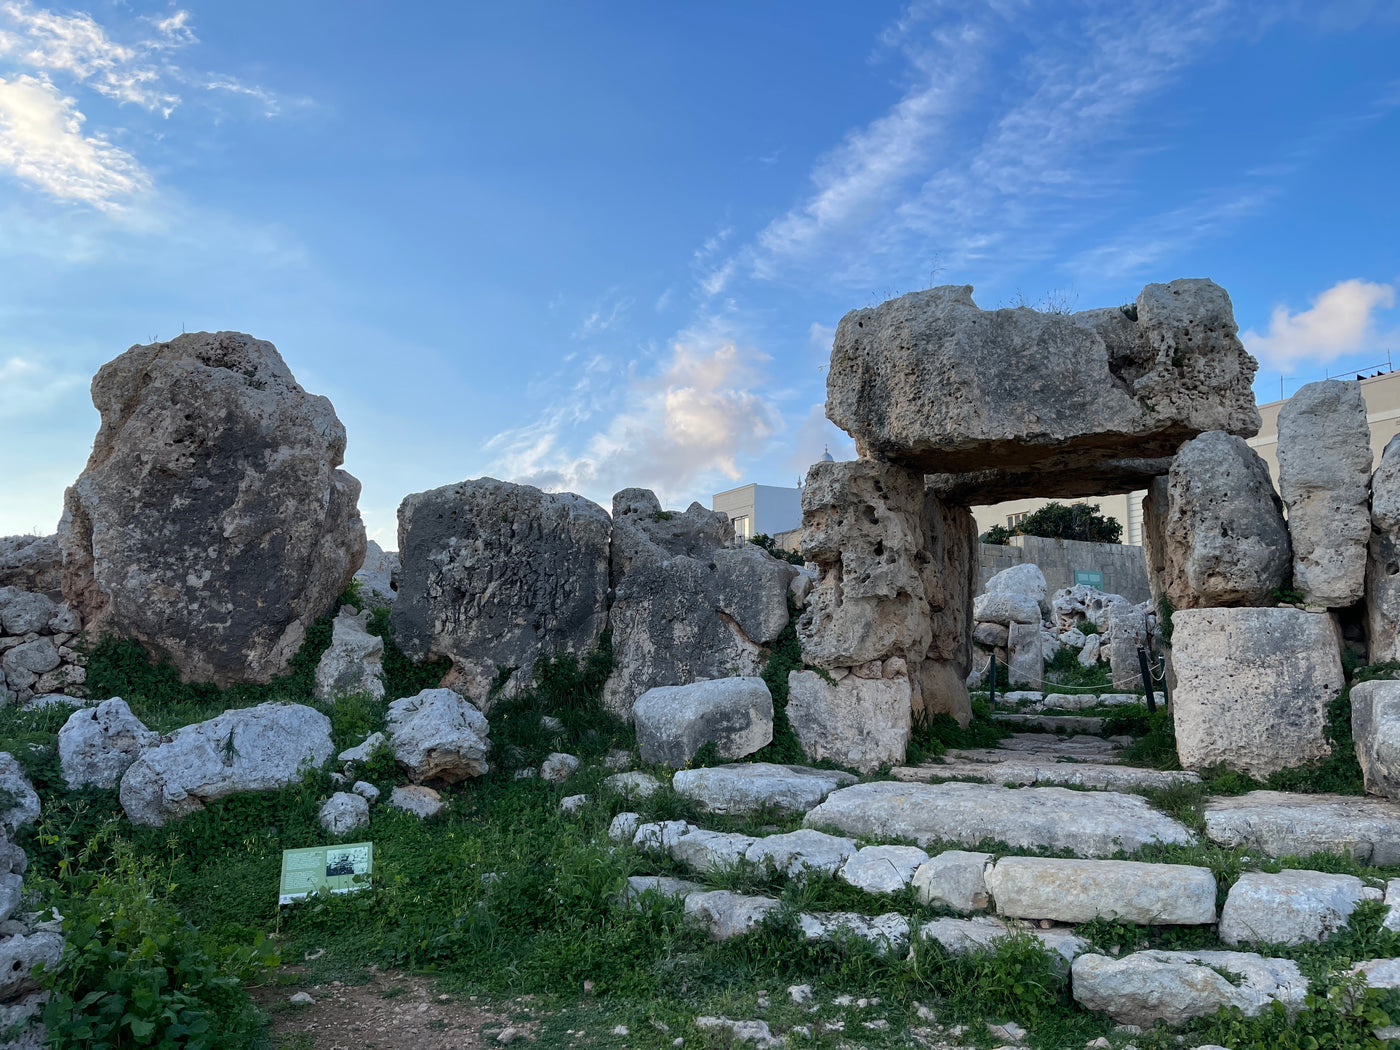 Megalithic Malta Tour - Early Bird Pricing $3150 (regularly $3400)